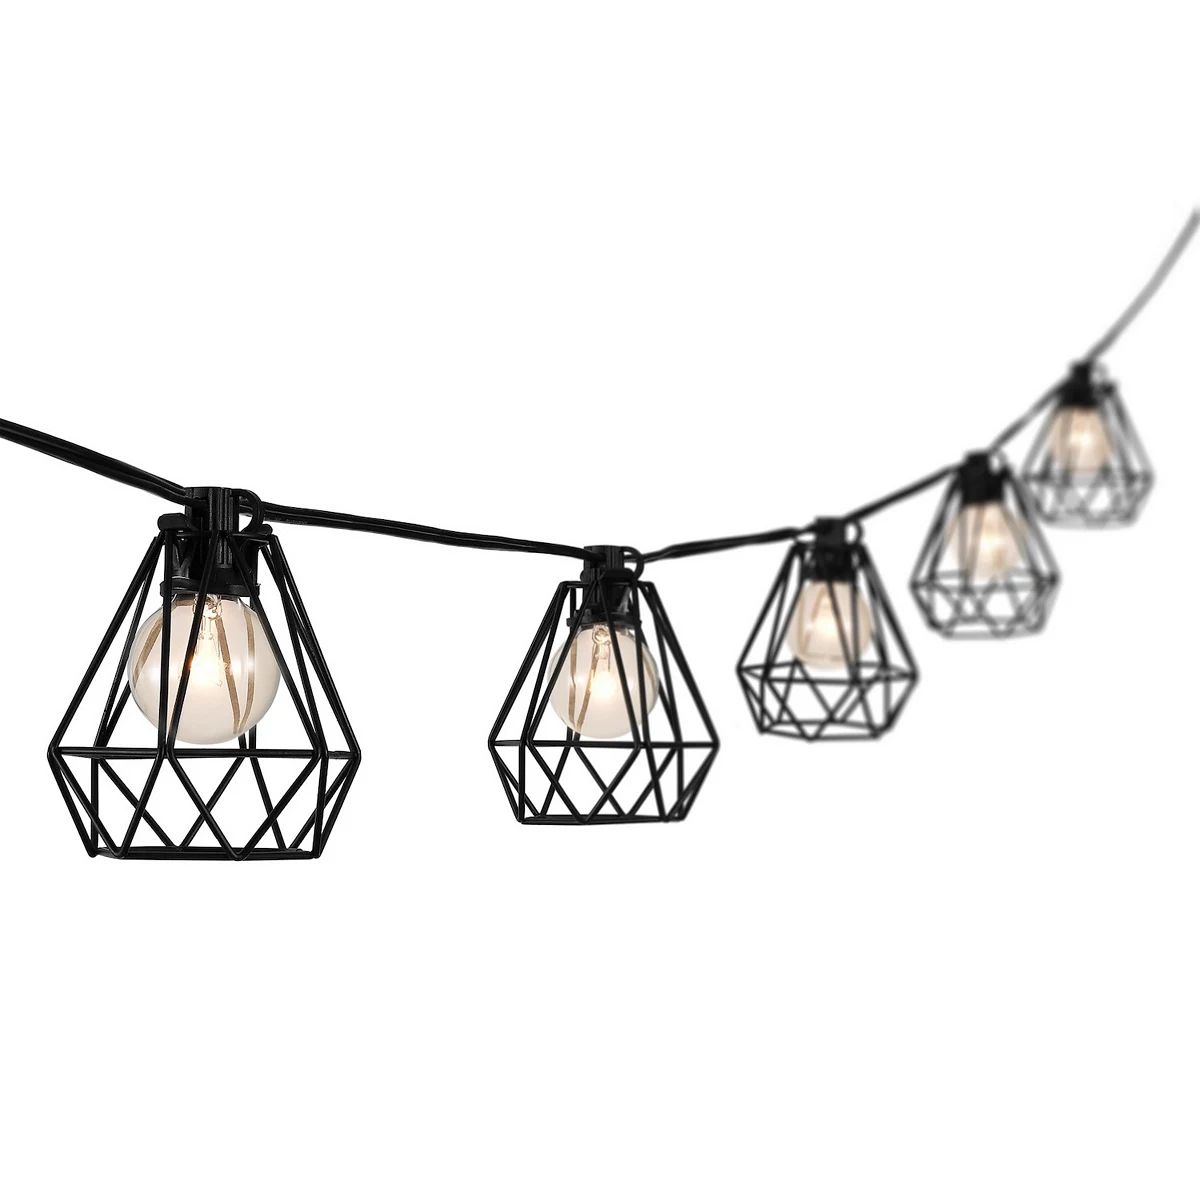 Indoor/outdoor Contemporary Transitional Incandescent G Diamond Cage String Lights | Kohl's